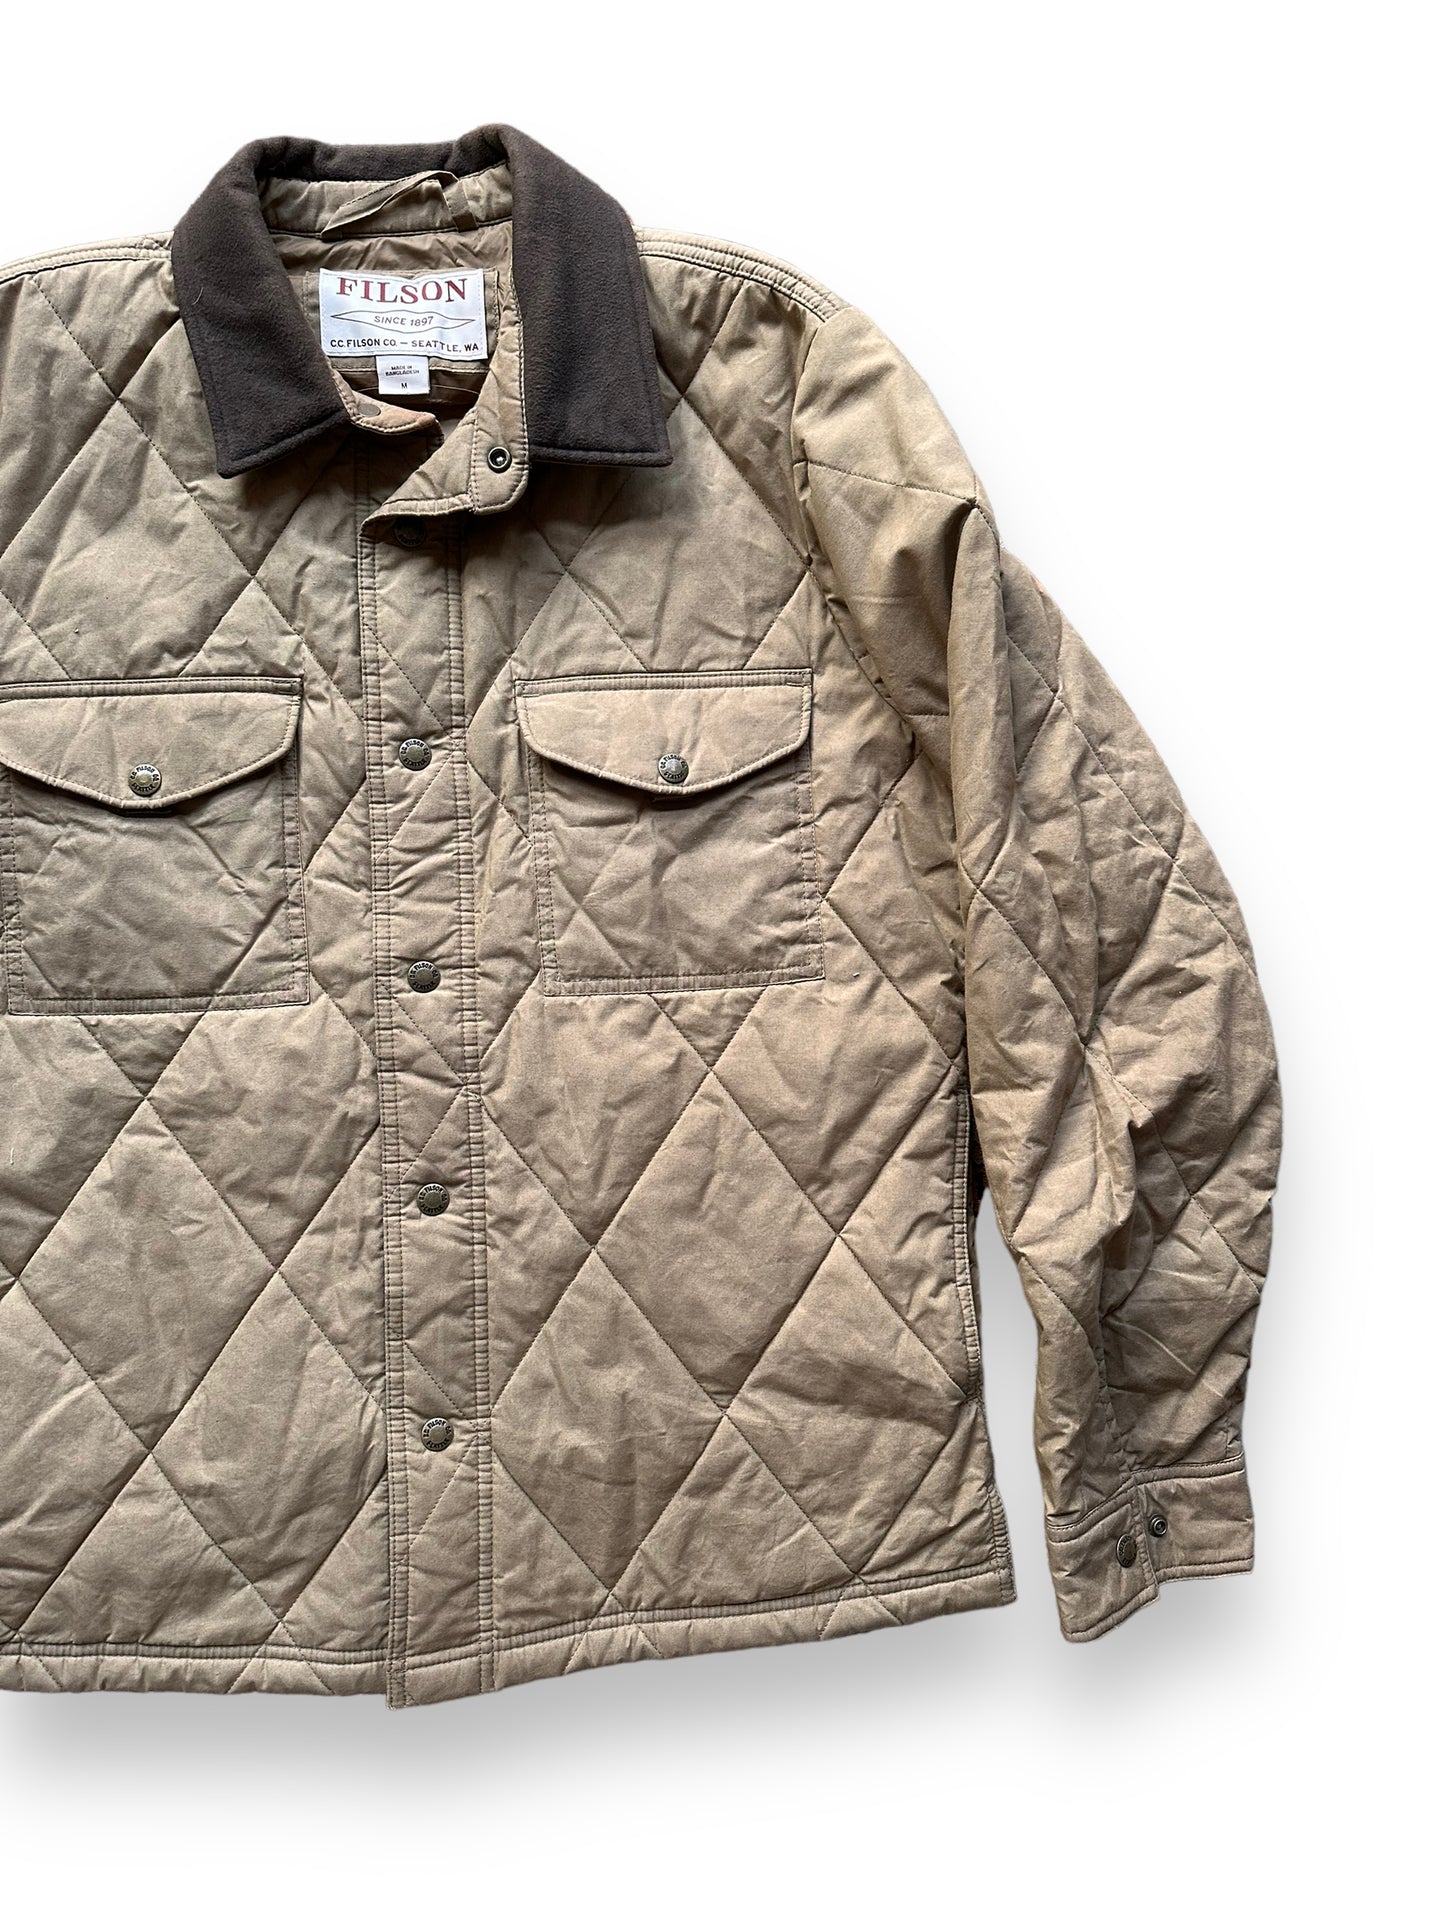 Front Left View of Filson Hyder Quilted Jac Primaloft Waxed Jacket SZ M |  Barn Owl Vintage Goods | Vintage Filson Workwear Seattle